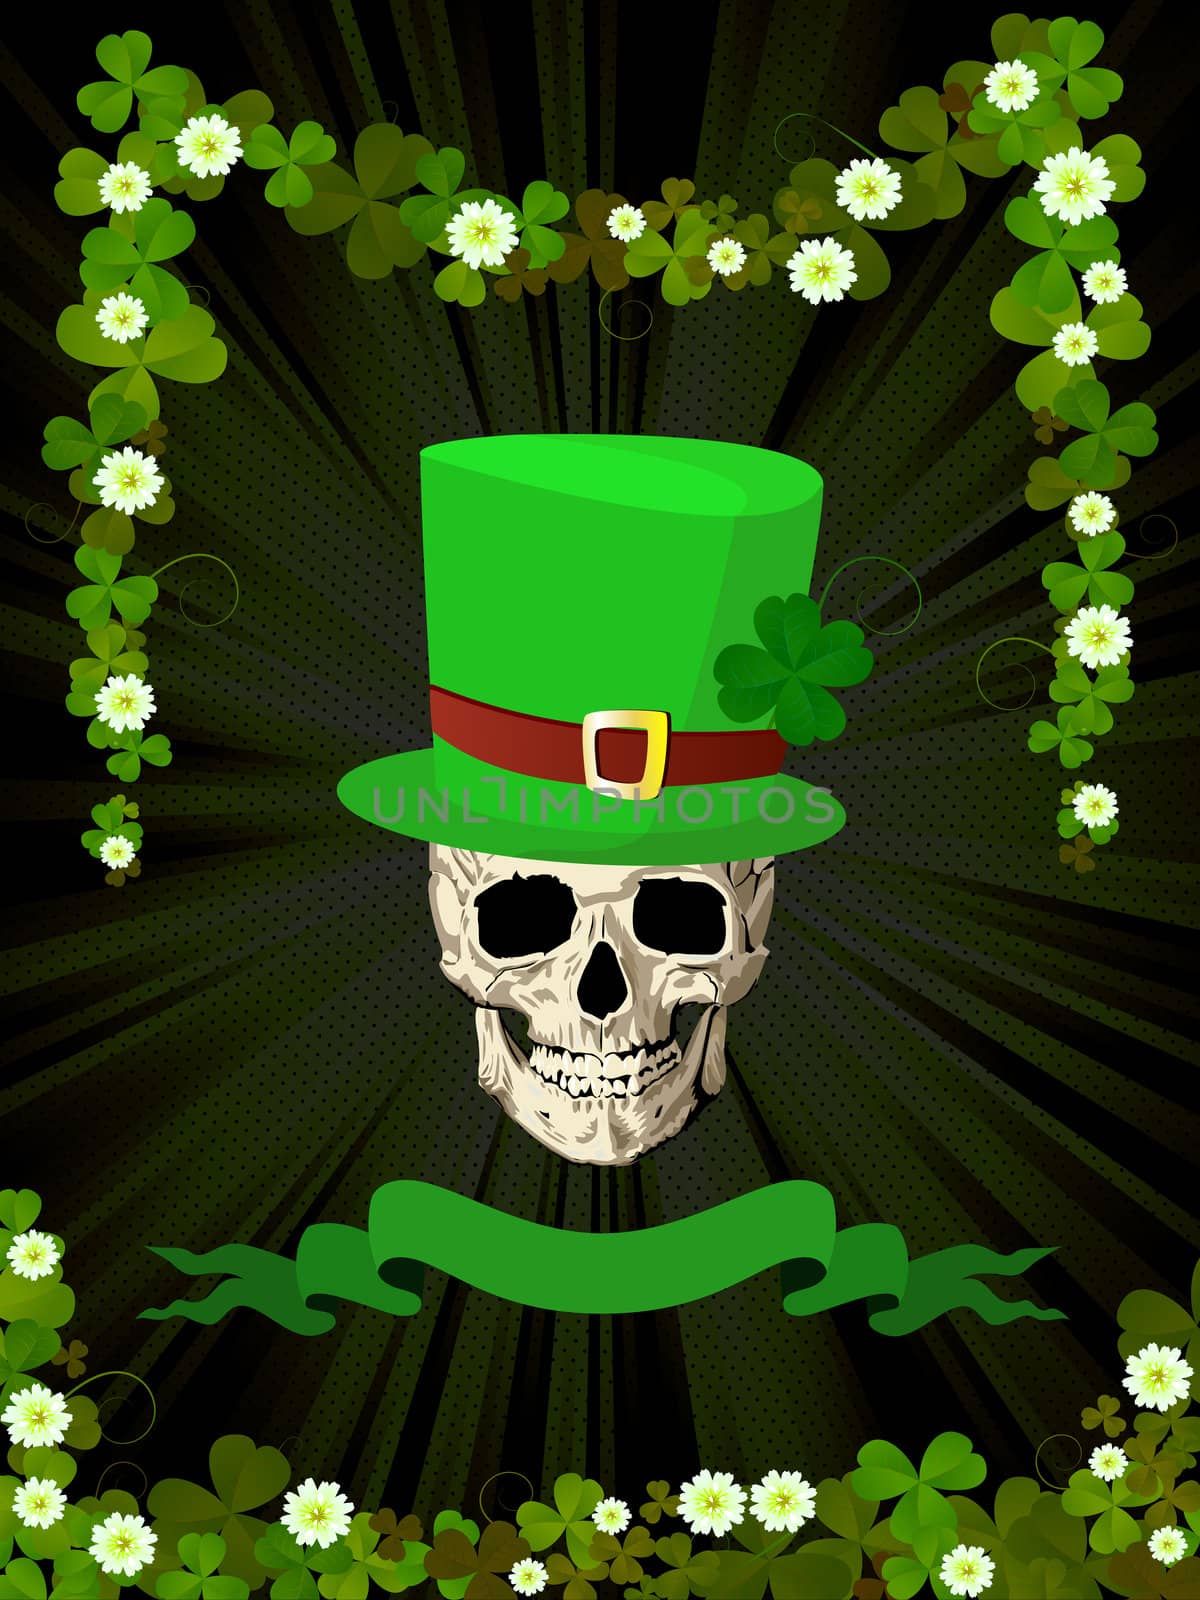 St.Patrick skull and clovers by Lirch